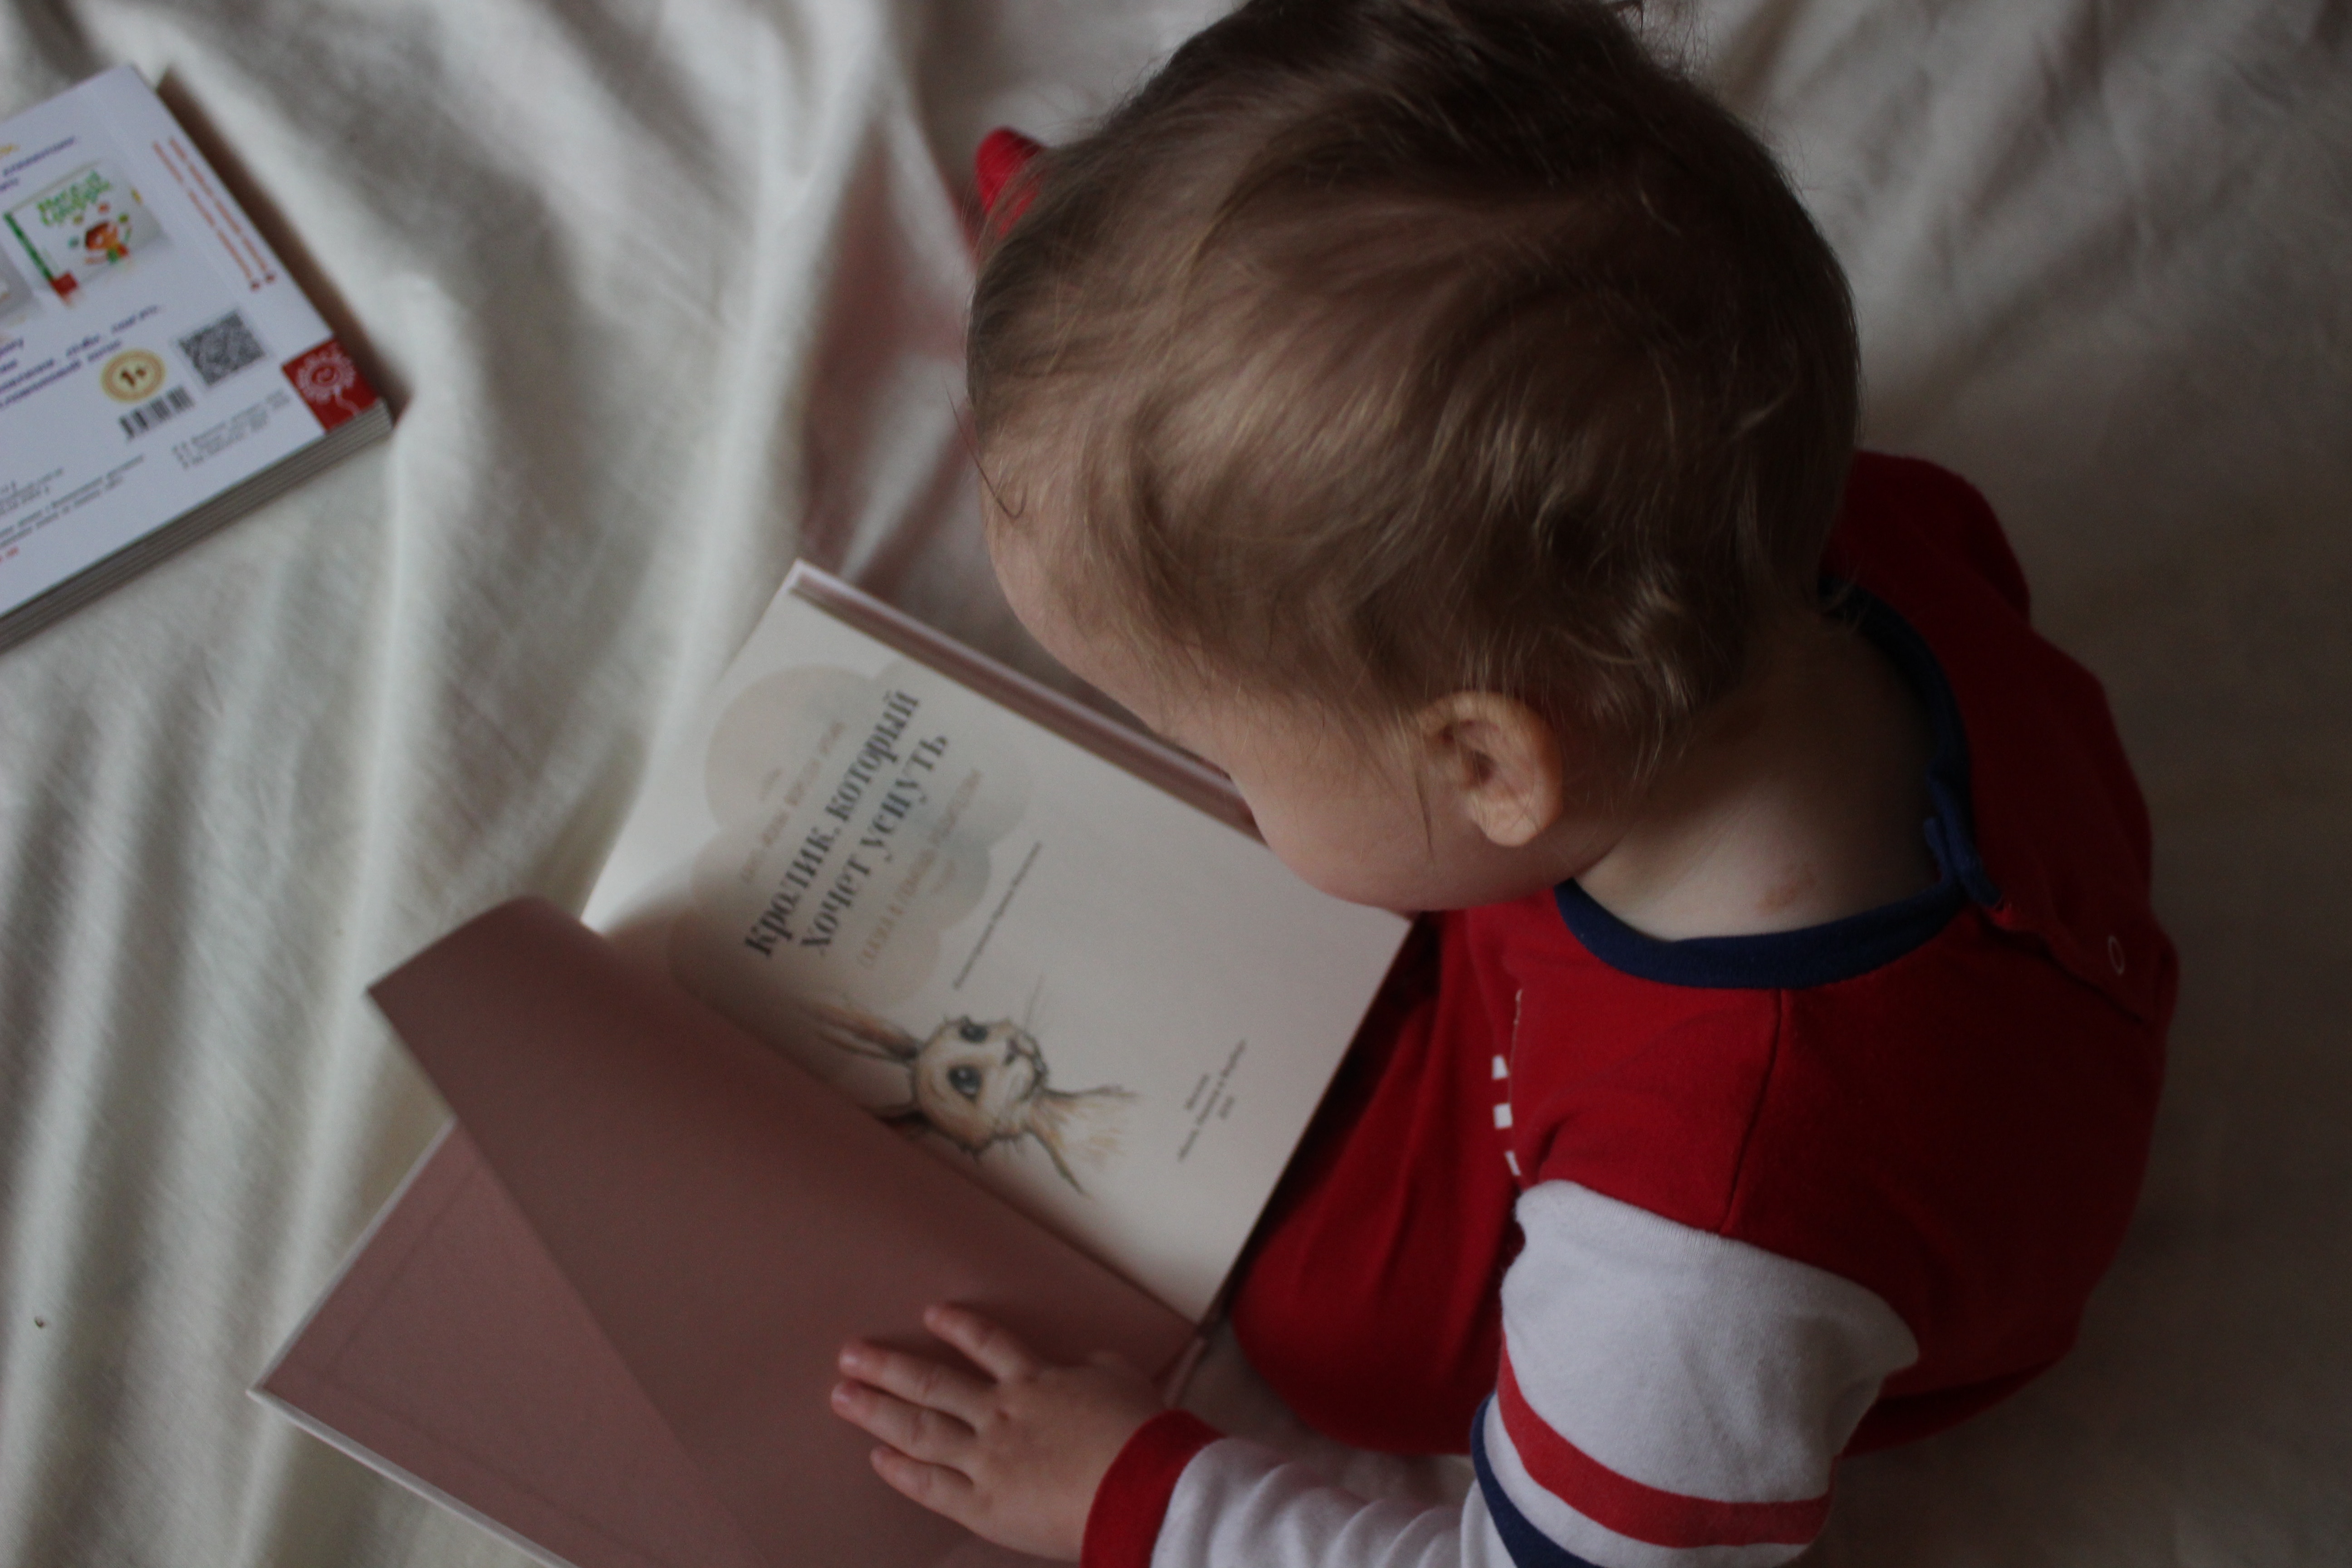 Small child reading a book.